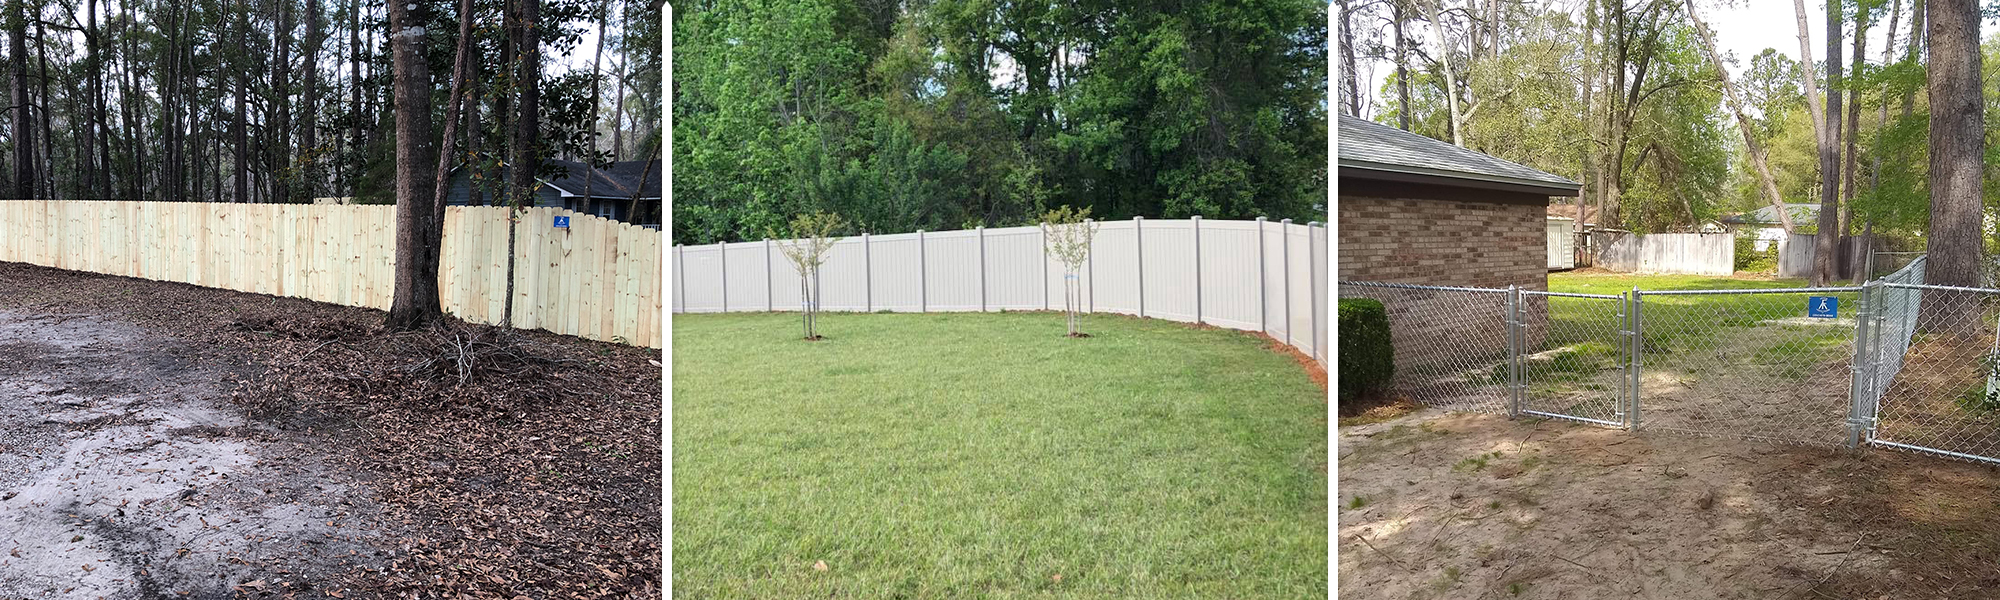 Fence Repair in Tallahassee, FL